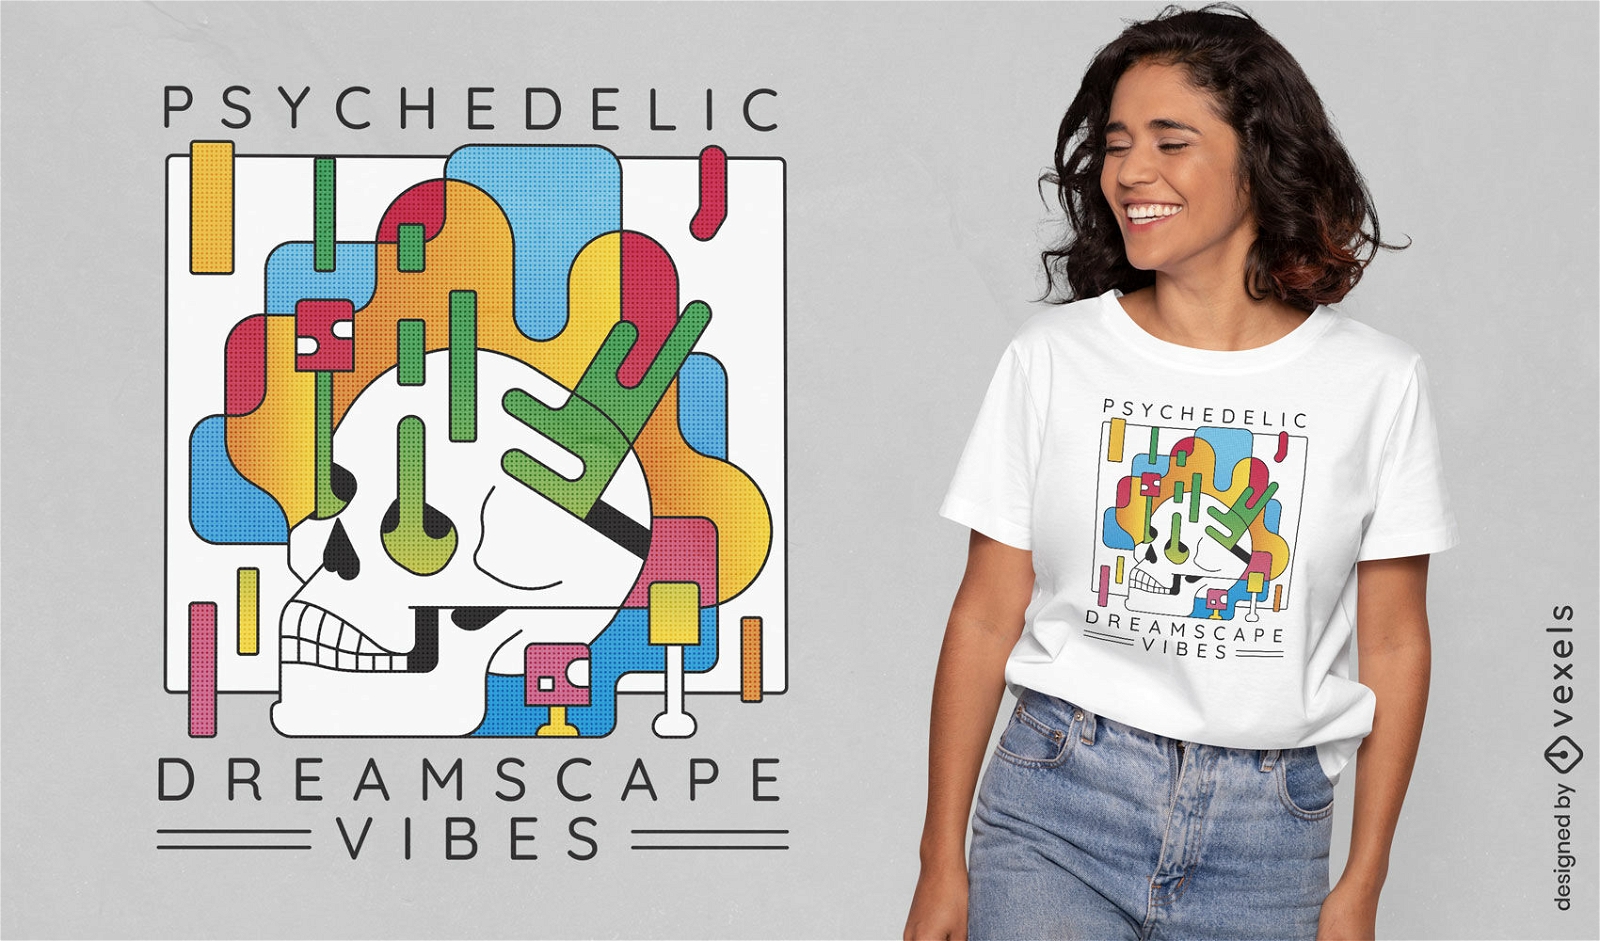 Psychedelic dreamscape vibes t-shirt design